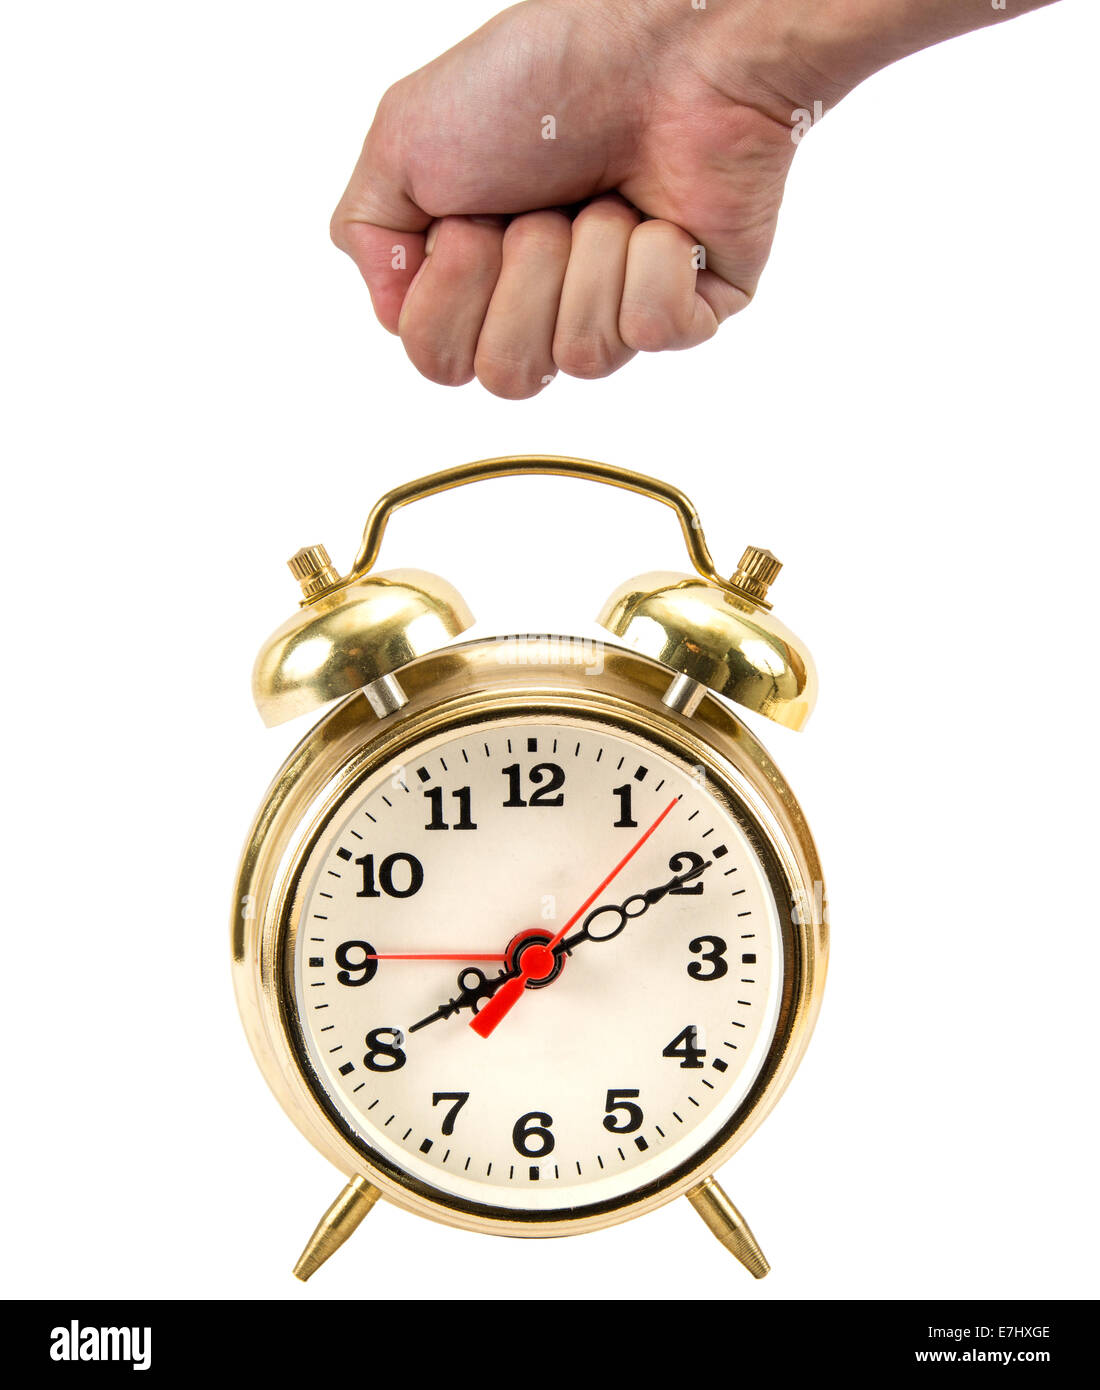 Man's hand in a fist about to hit a gold alarm clock isolated on white Stock Photo